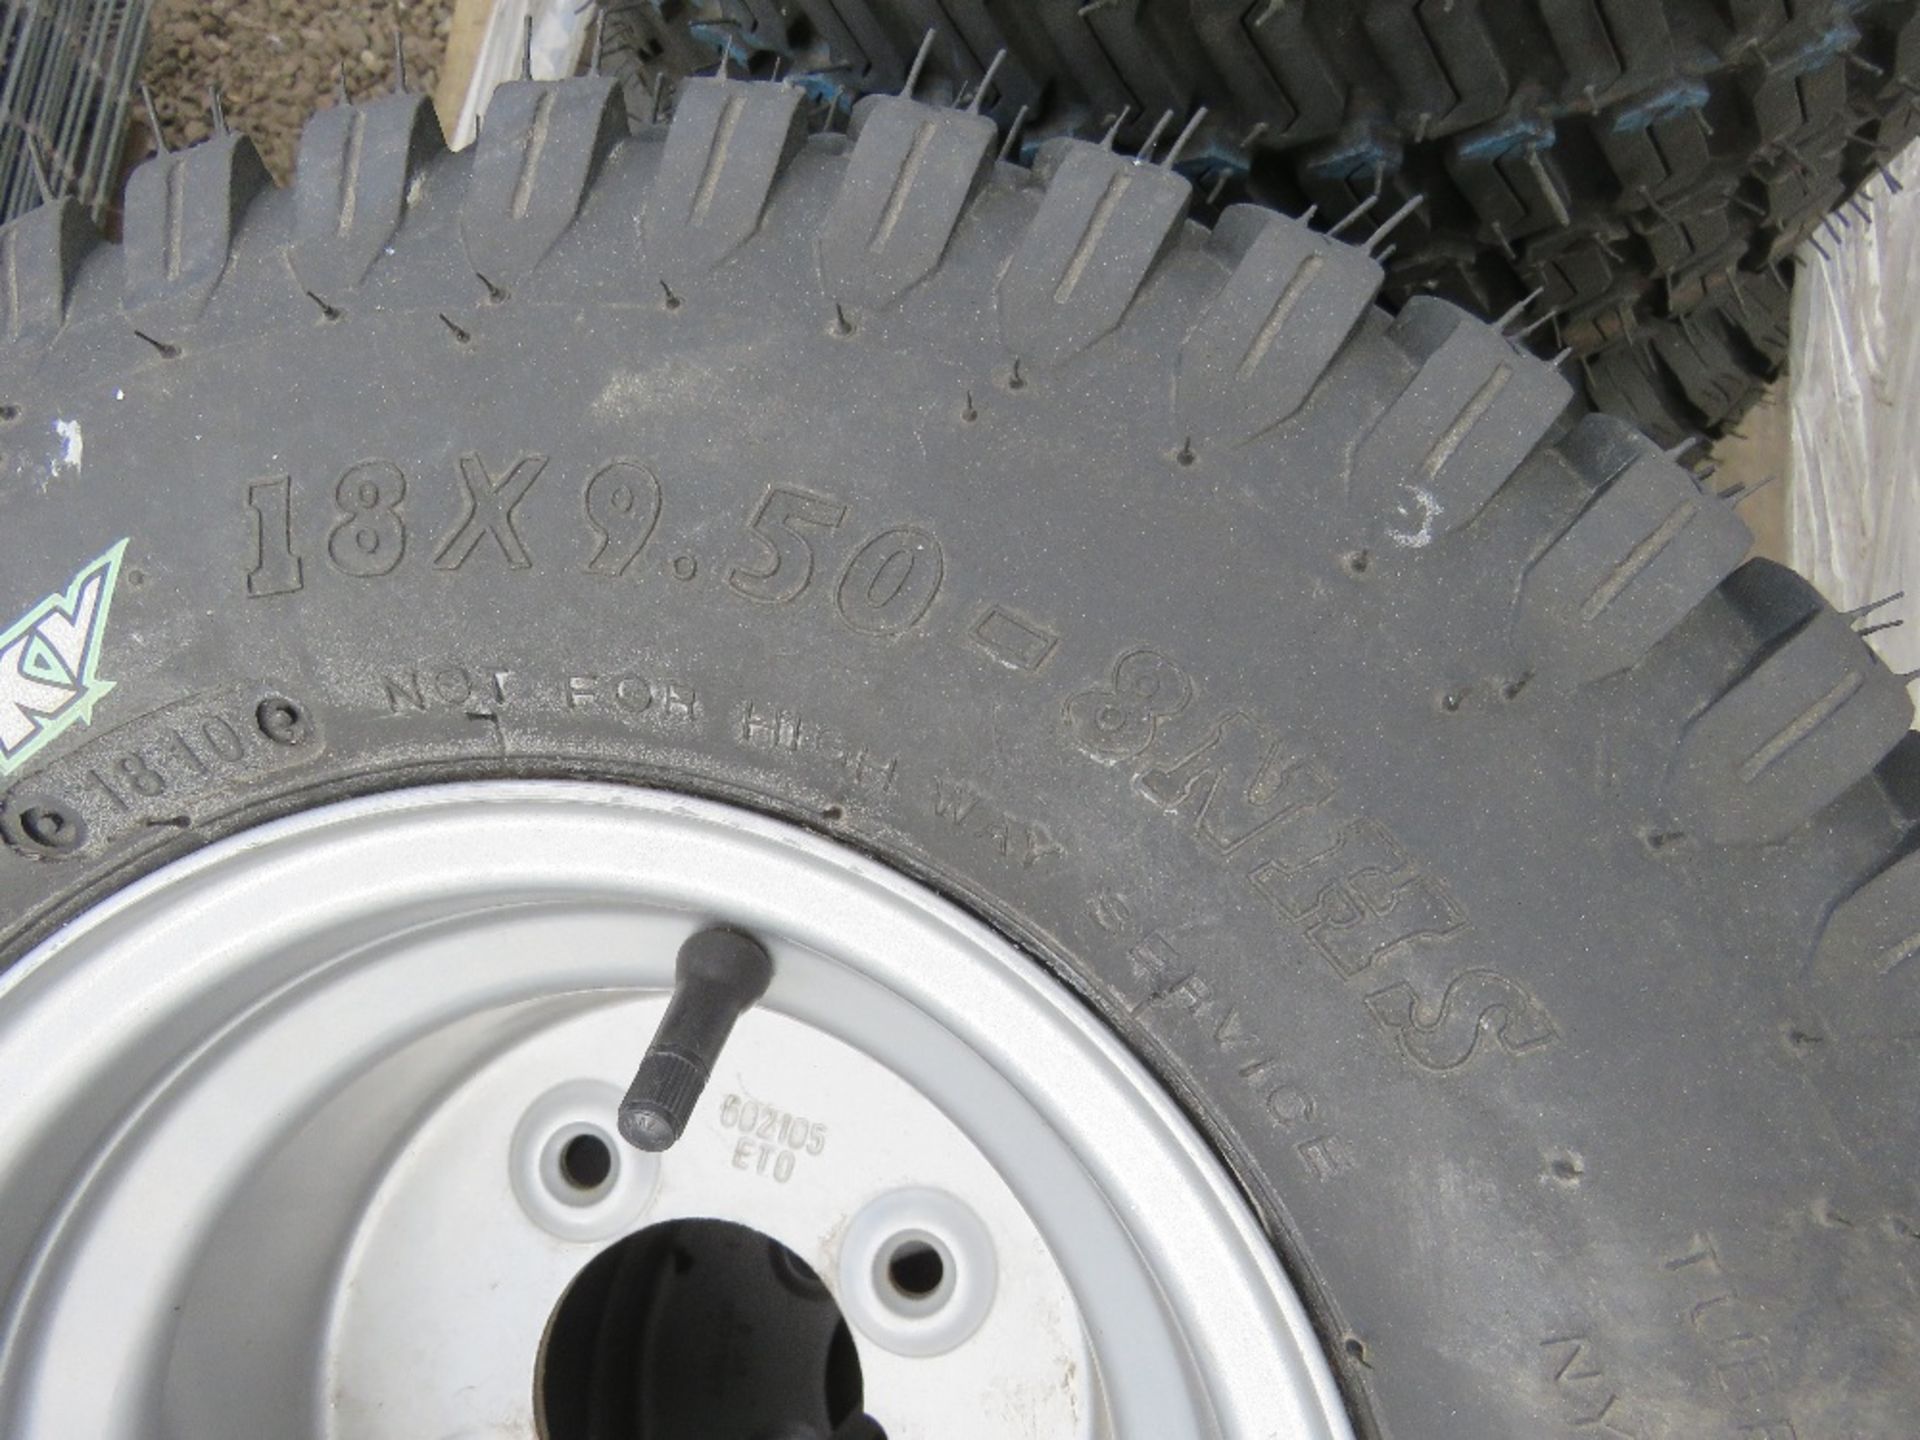 SET OF 4 X RIDE ON TRACTOR/MOWER WHEELS AND TYRES, TORO TYPE. - Image 2 of 3